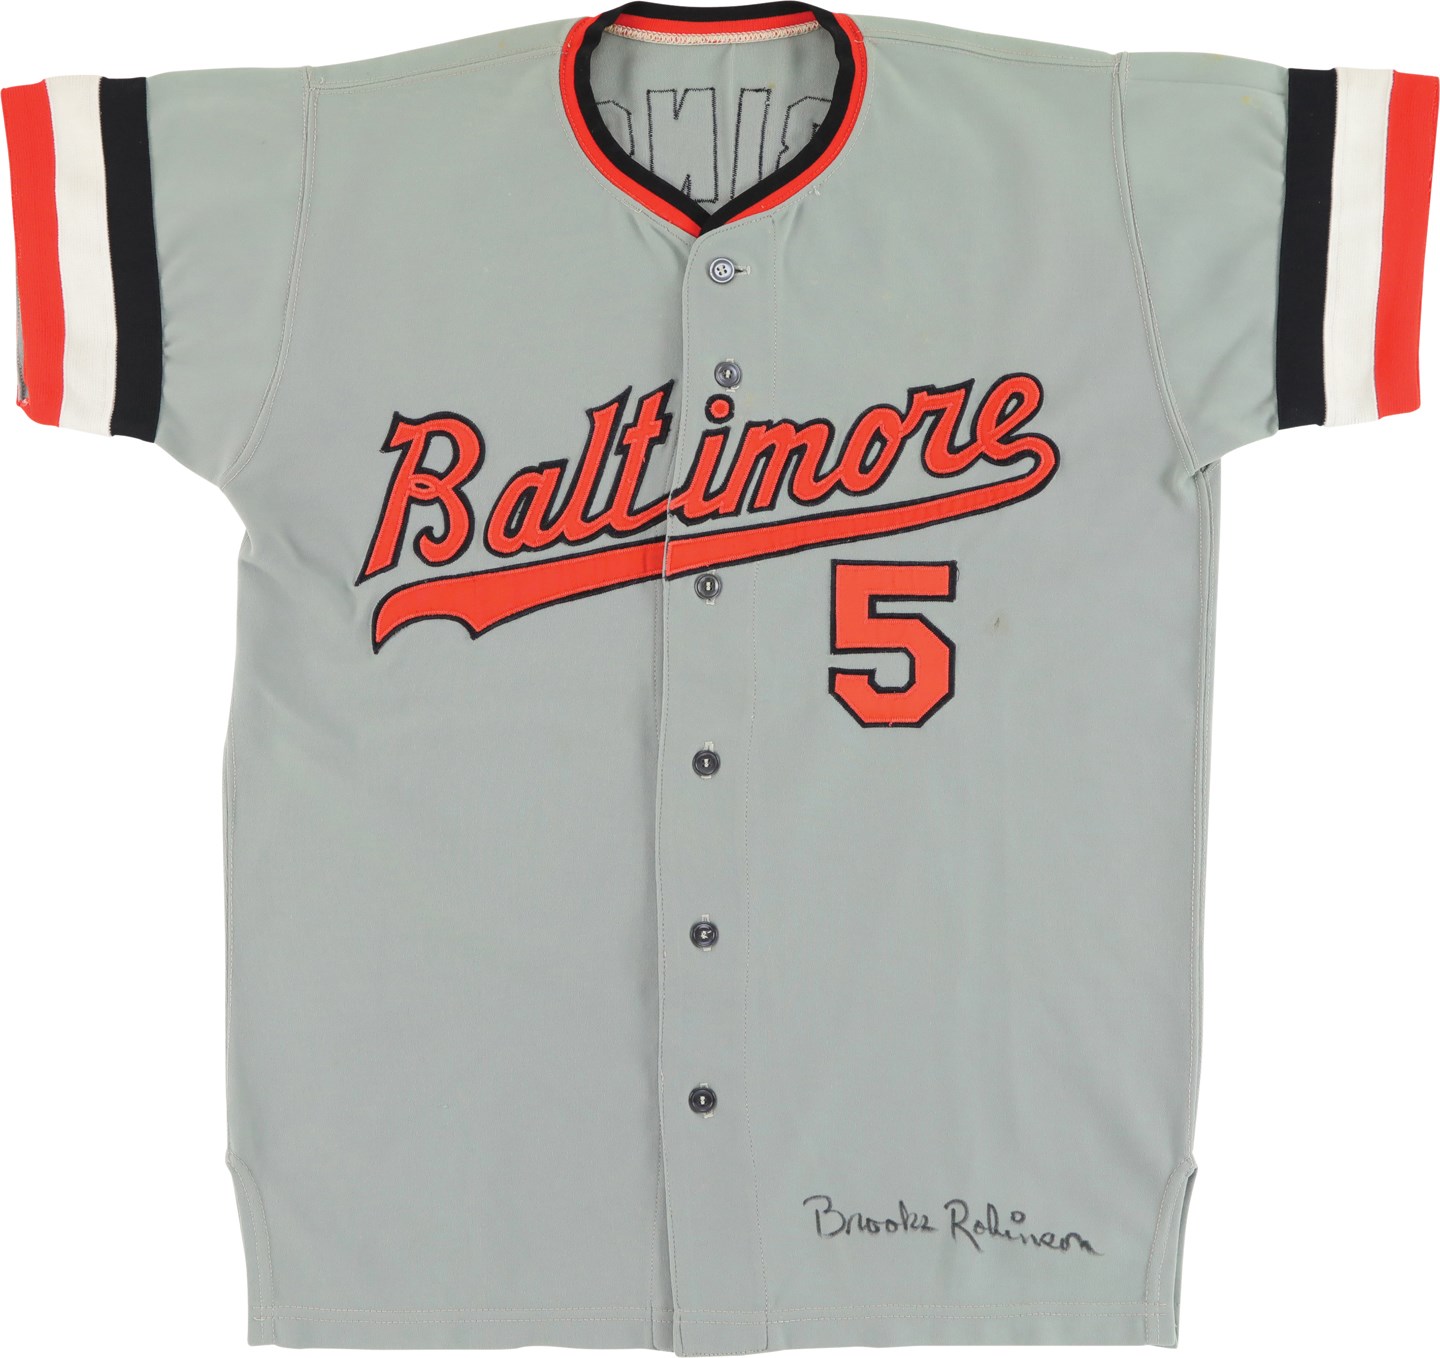 Baseball Equipment - 1972 Brooks Robinson Baltimore Orioles Signed Game Worn Jersey (MEARS 10)